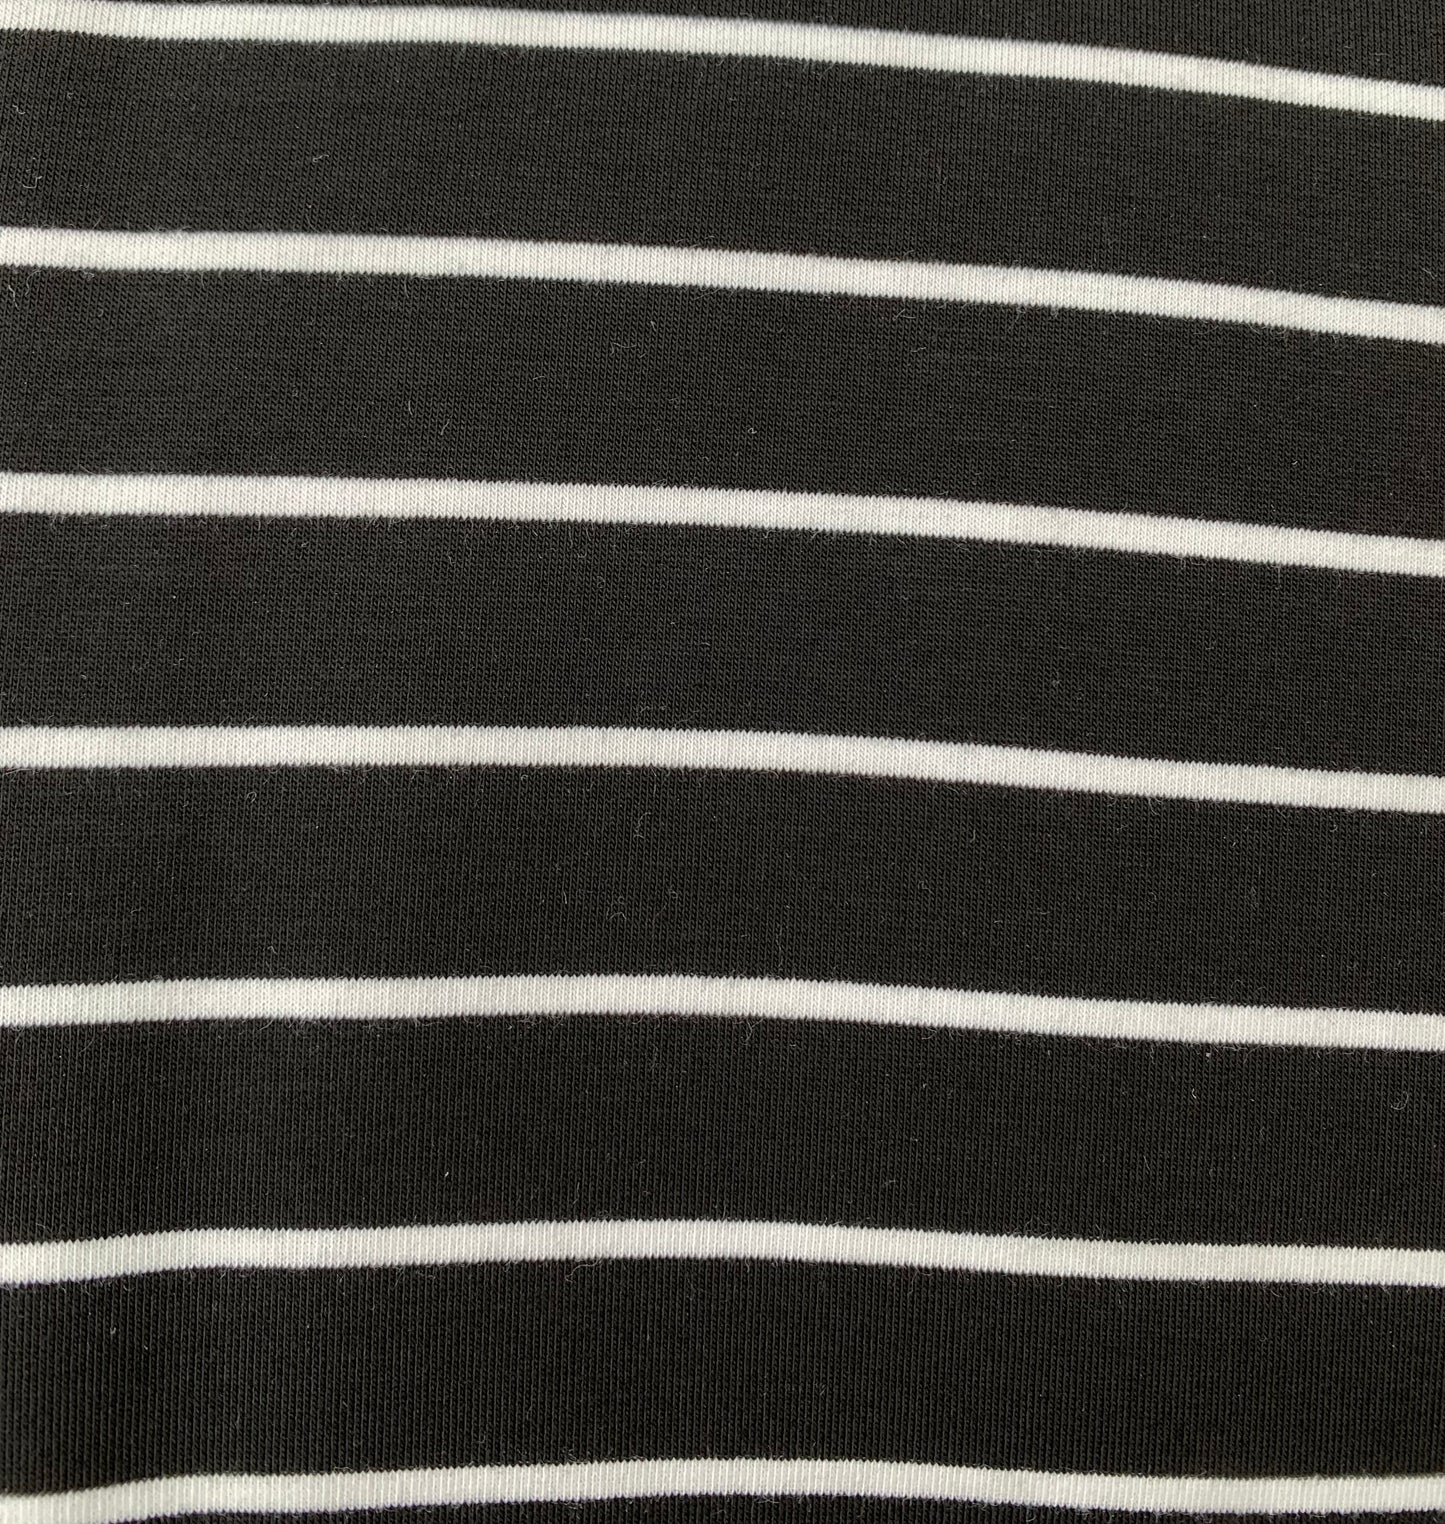 French Terry- Black with White Stripes